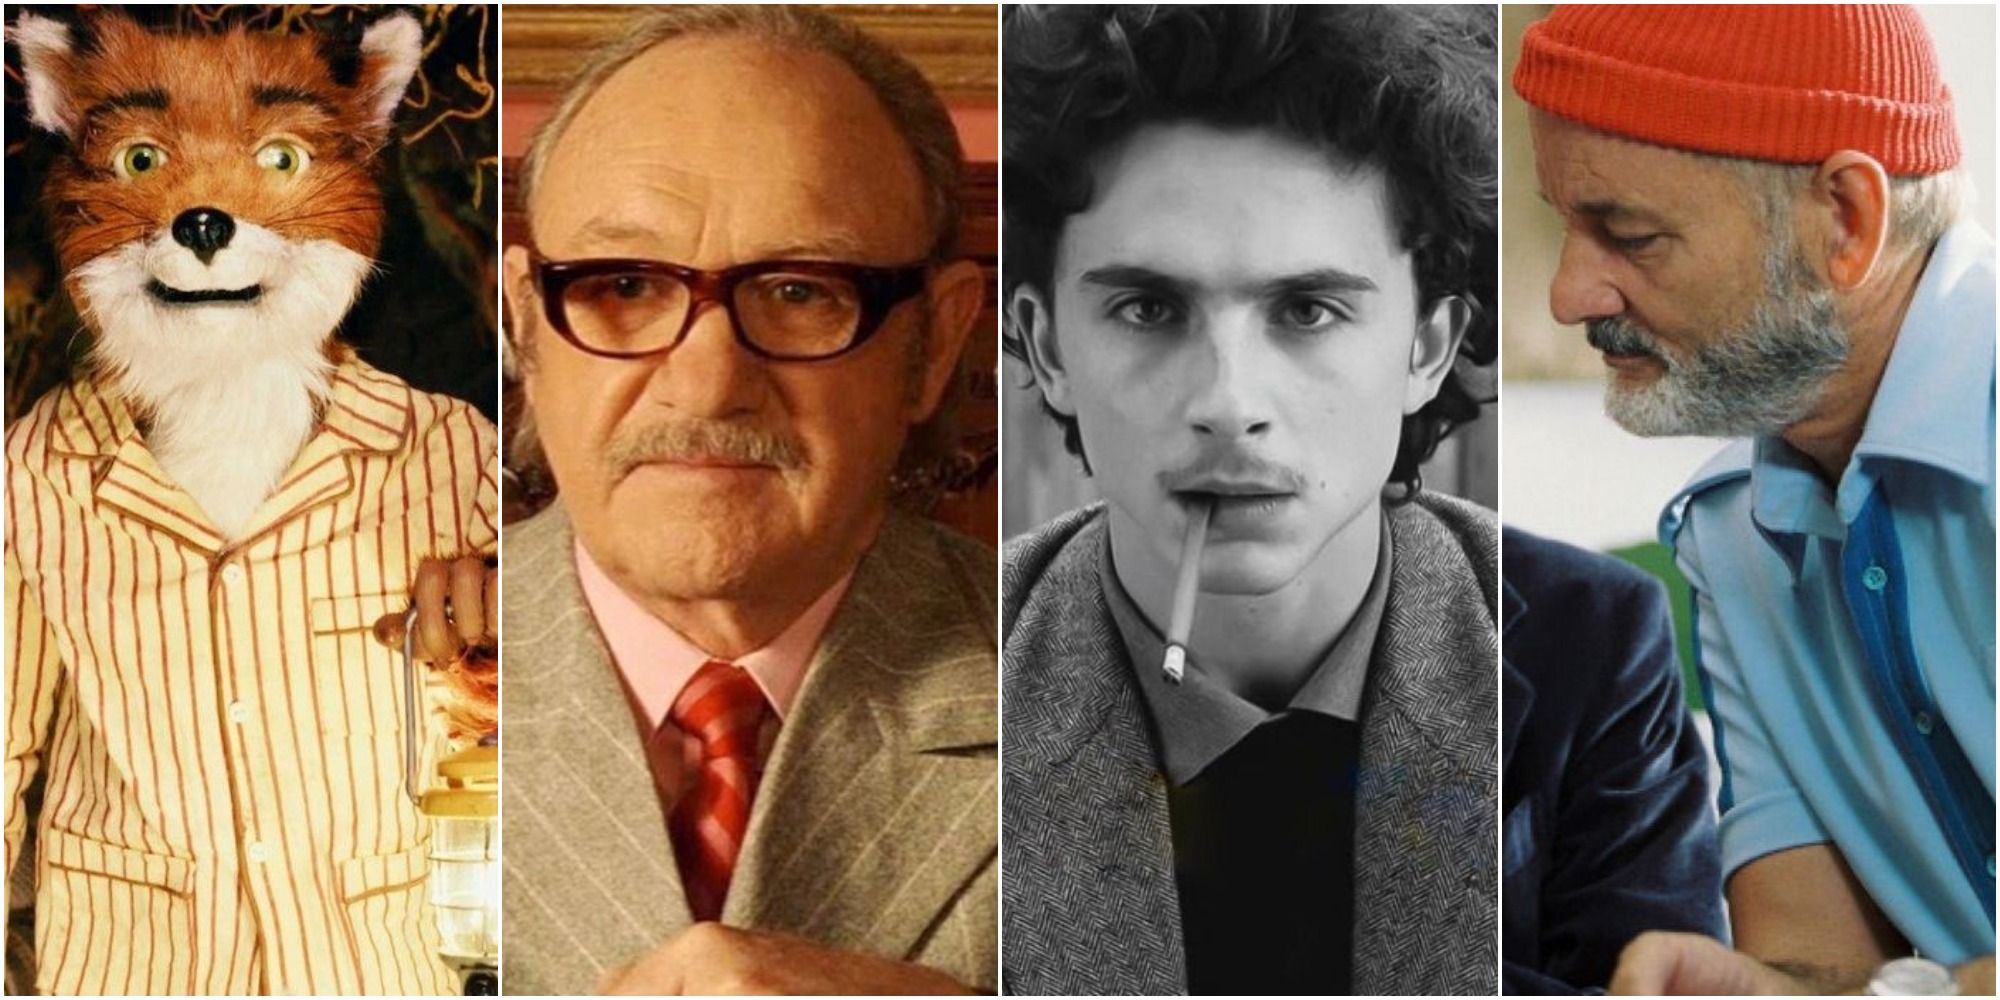 Fantastic Mr. Fox from 'Fantastic Mr. Fox', Royal Tenenbaum from 'The Royal Tenenbaums', Zeffirelli from 'The French Dispatch', and Steve Zissou from 'The Life Aquatic'